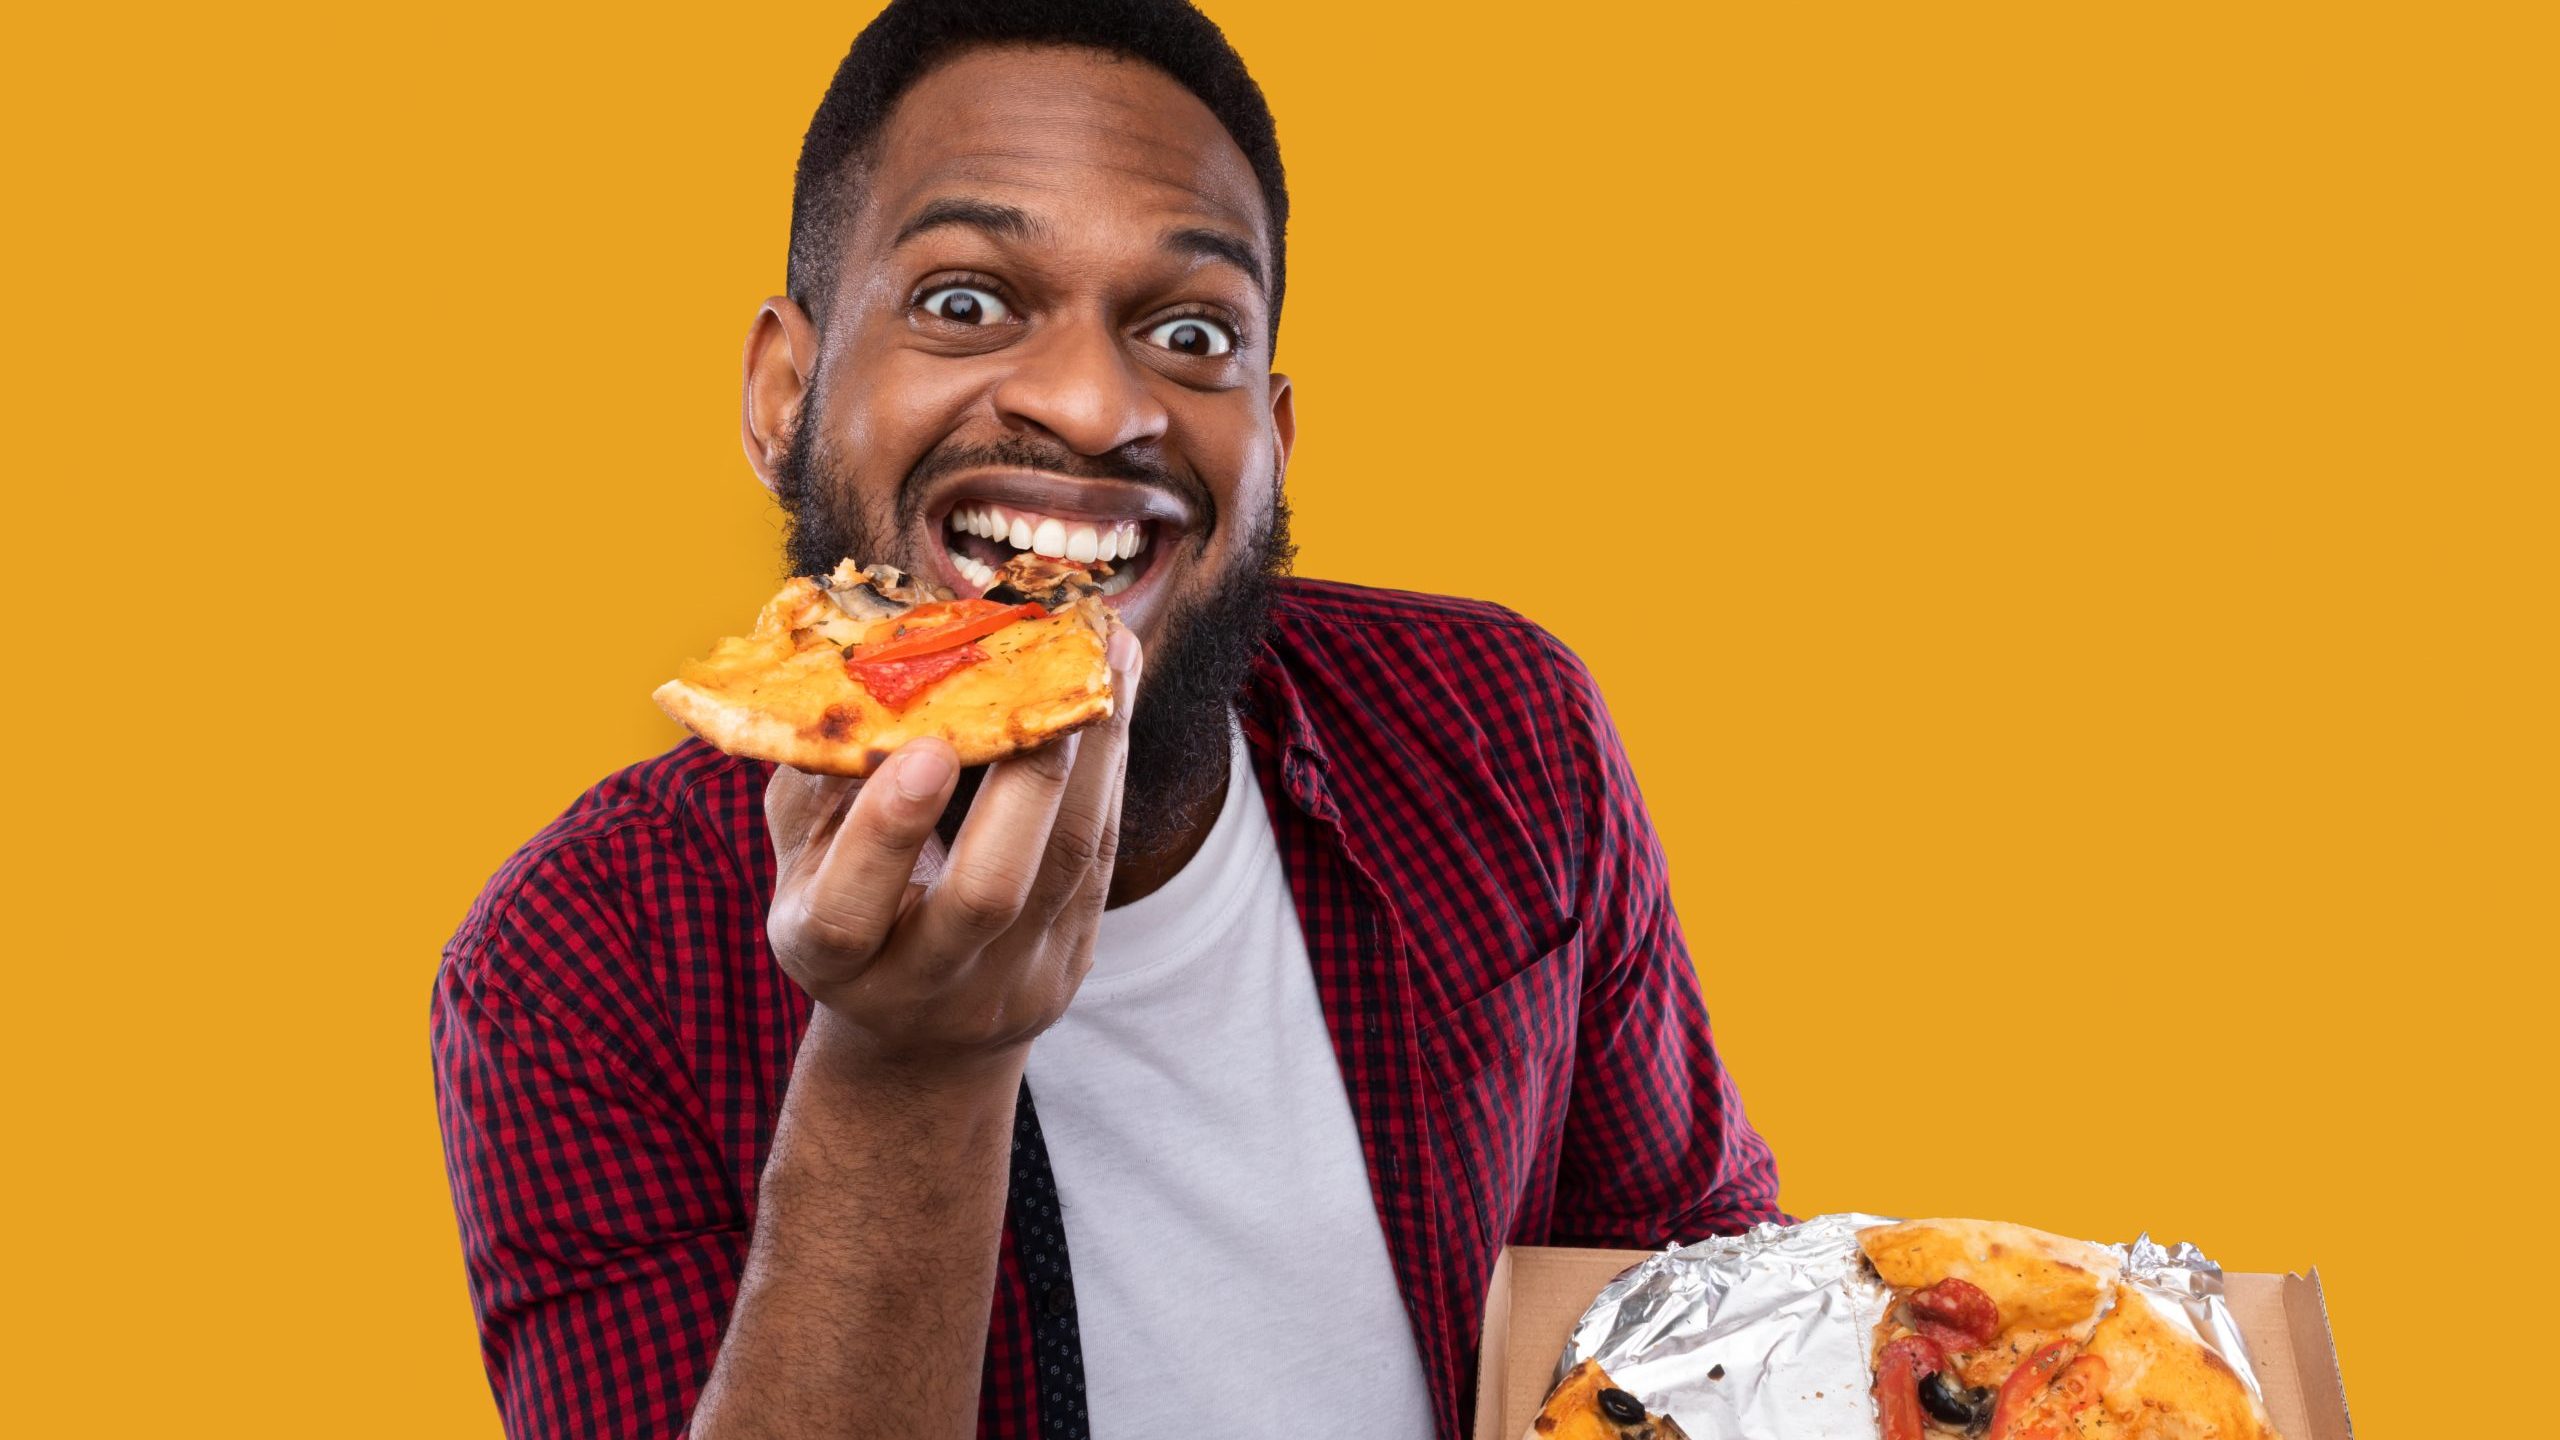 A man eating a slice of pizza while holding the rest of the pizza in one hand.